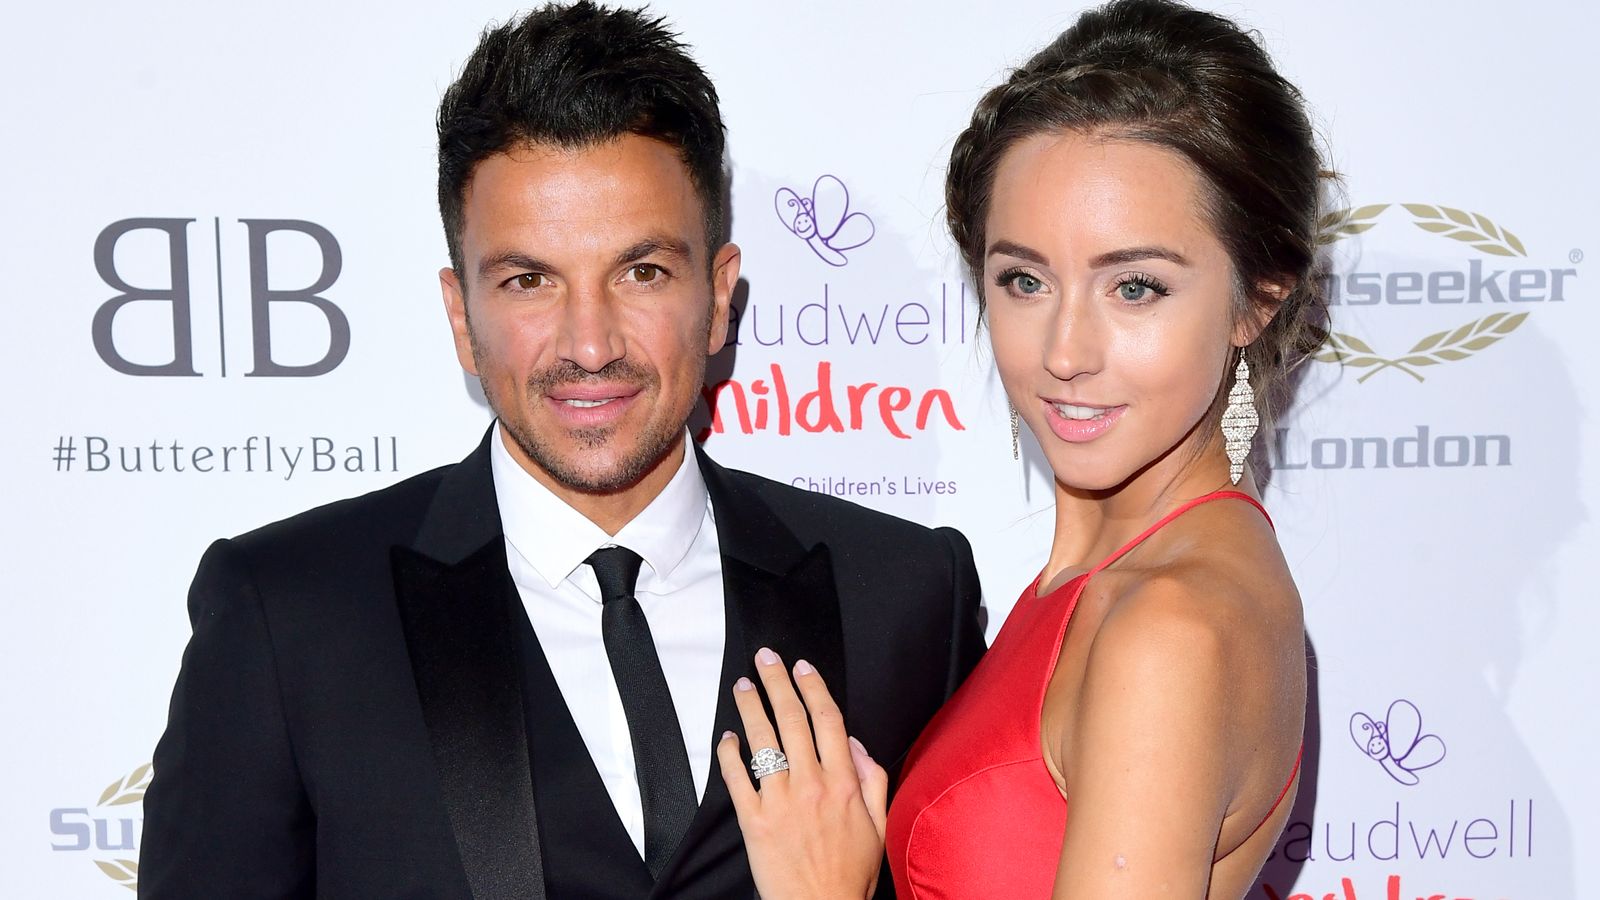 Peter Andre and wife Emily MacDonagh welcome their third child